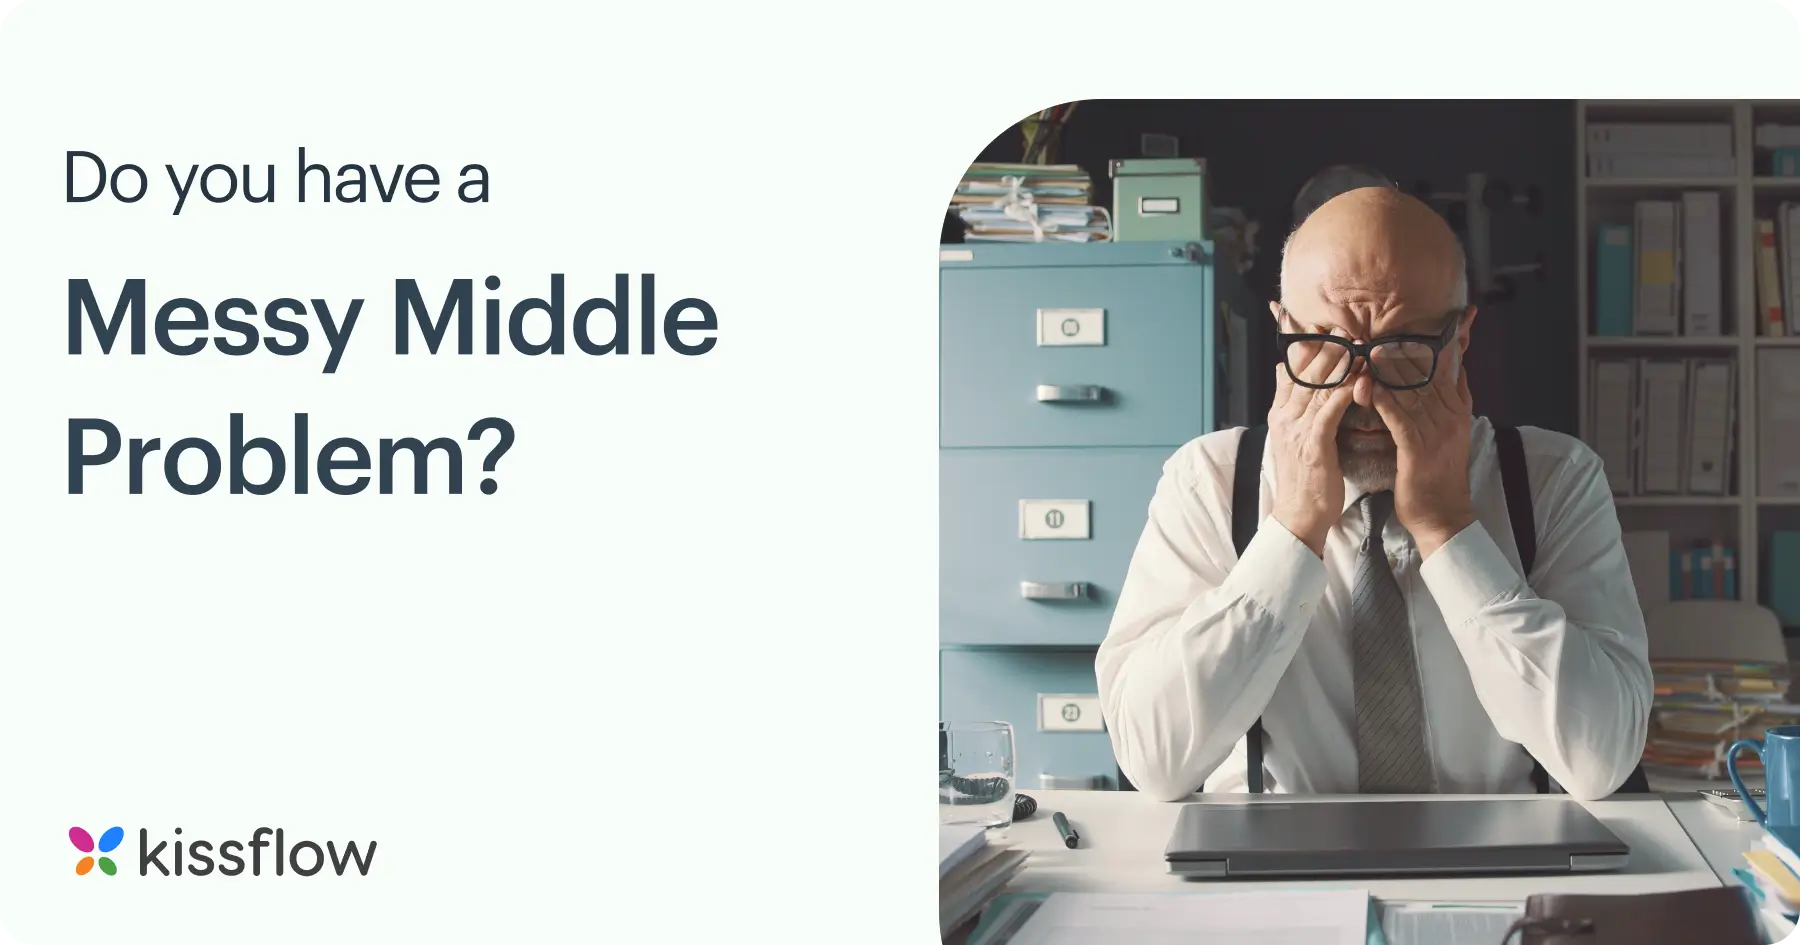 Do you have a messy middle problem?